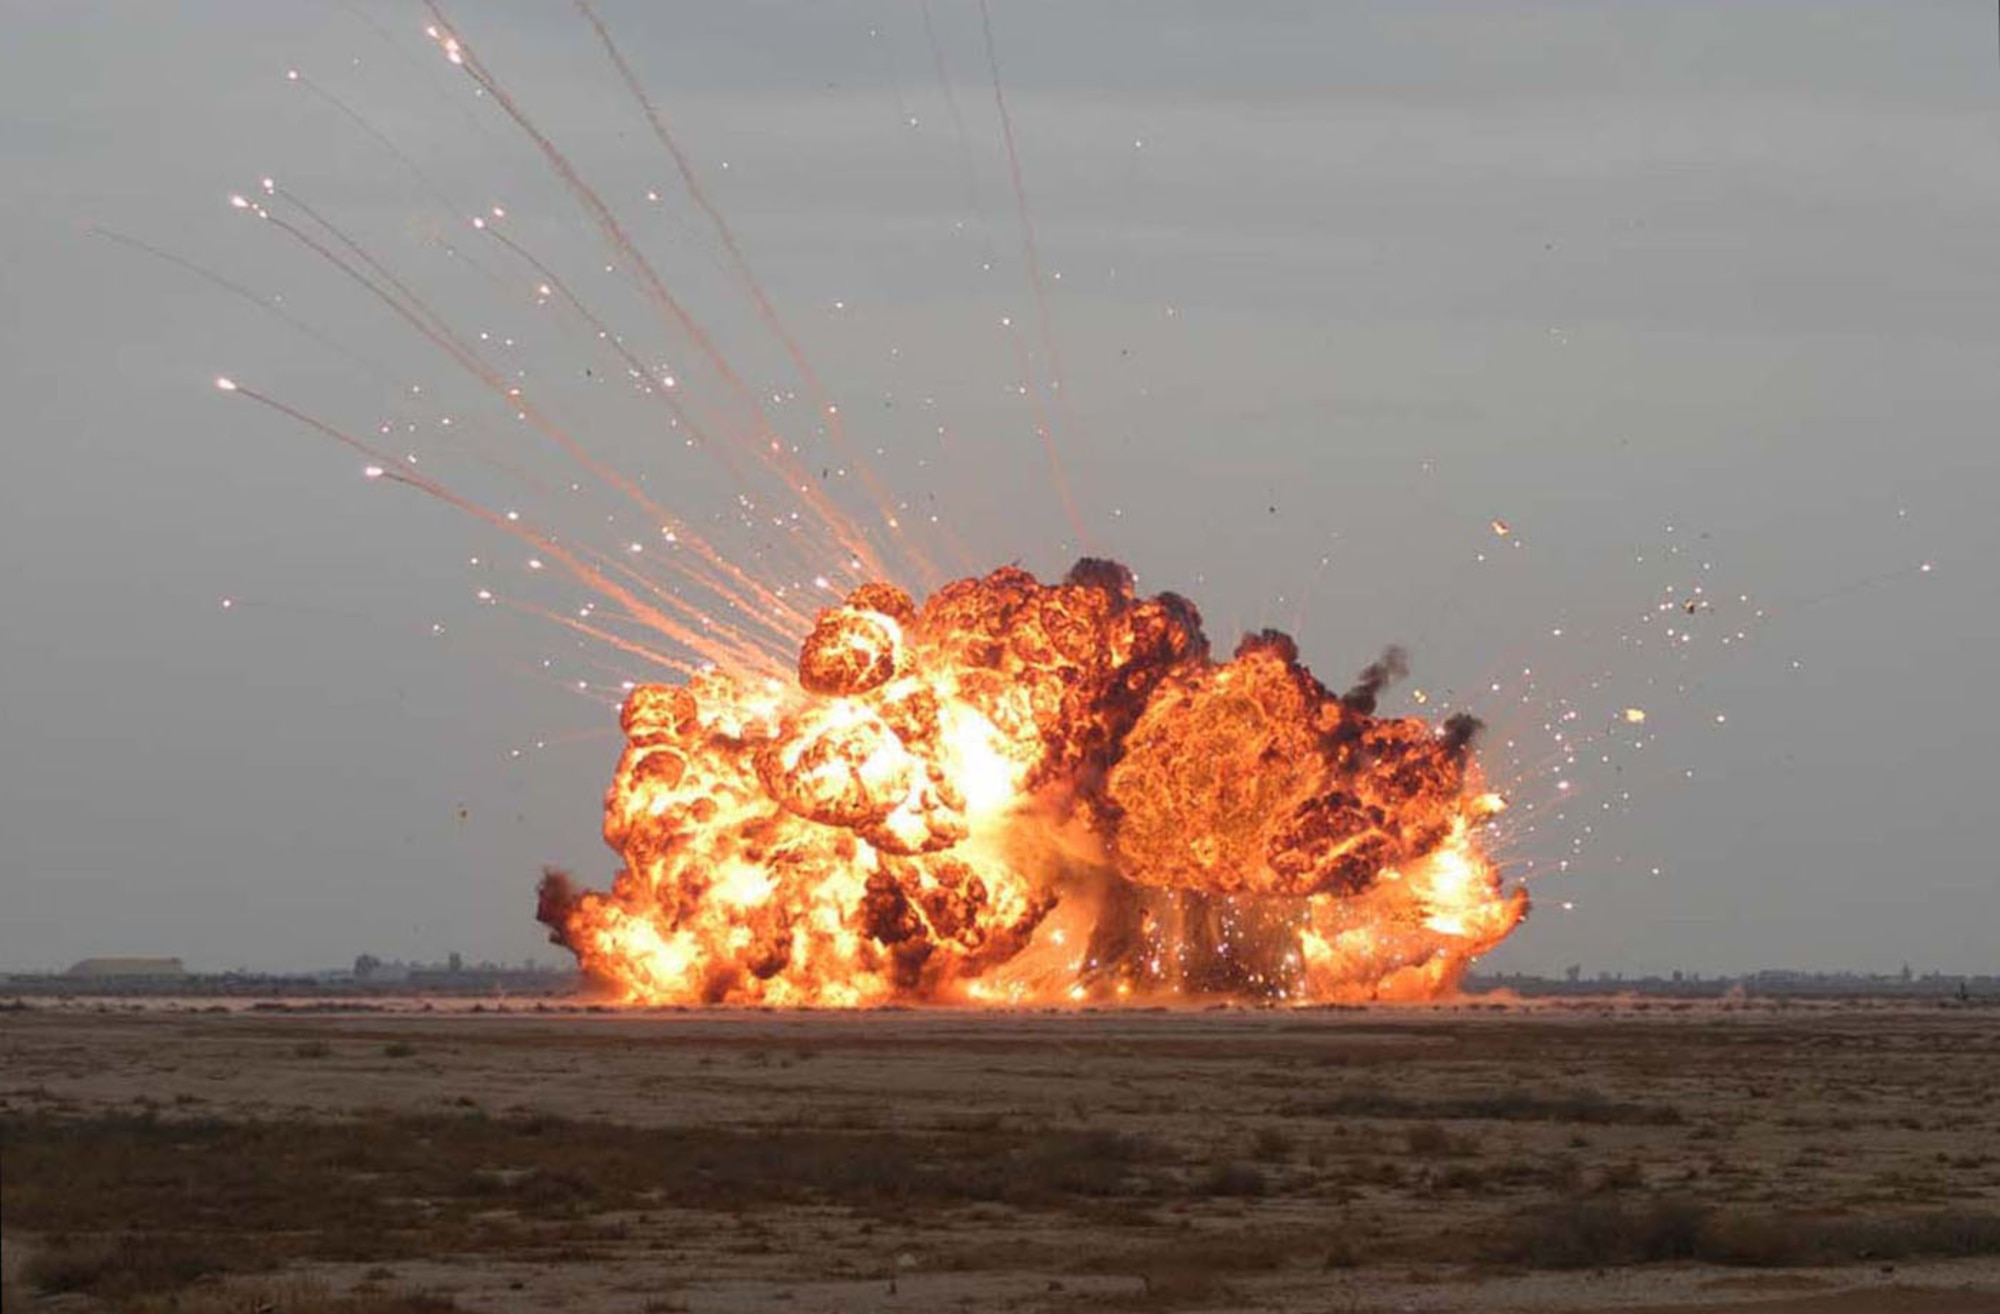 BALAD AIR BASE, Iraq -- A controlled detonation eliminates unexploded ordnance found in the area.  Airmen of the 332nd Expeditionary Civil Engineer Squadron explosive ordnance disposal unit destroy items weekly.  (U.S. Air Force photo)